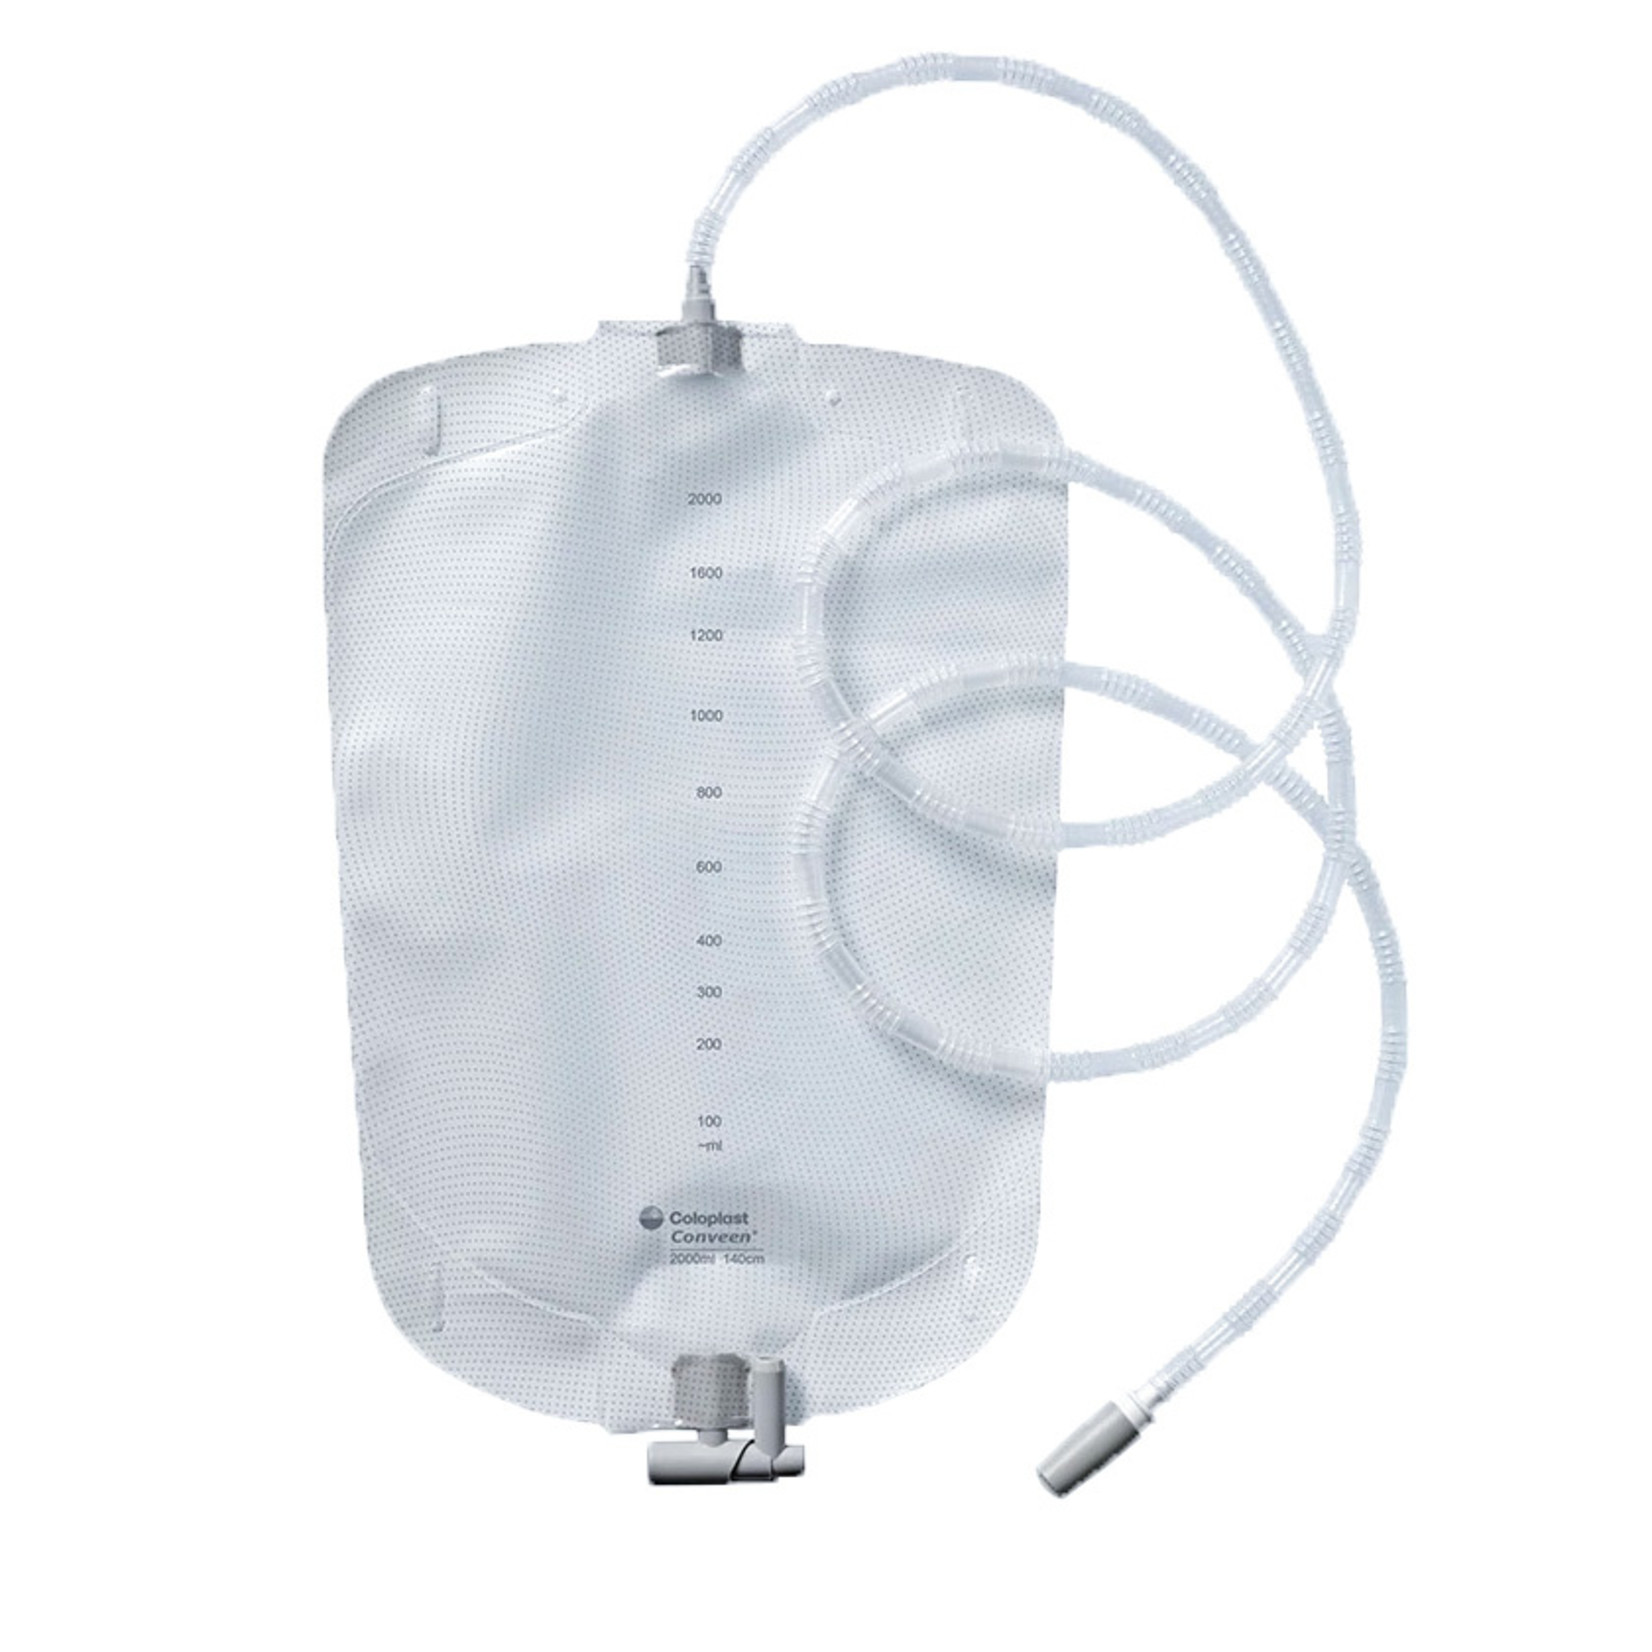 Coloplast Conveen® Basic Bedside Drainage Bag Non-Sterile